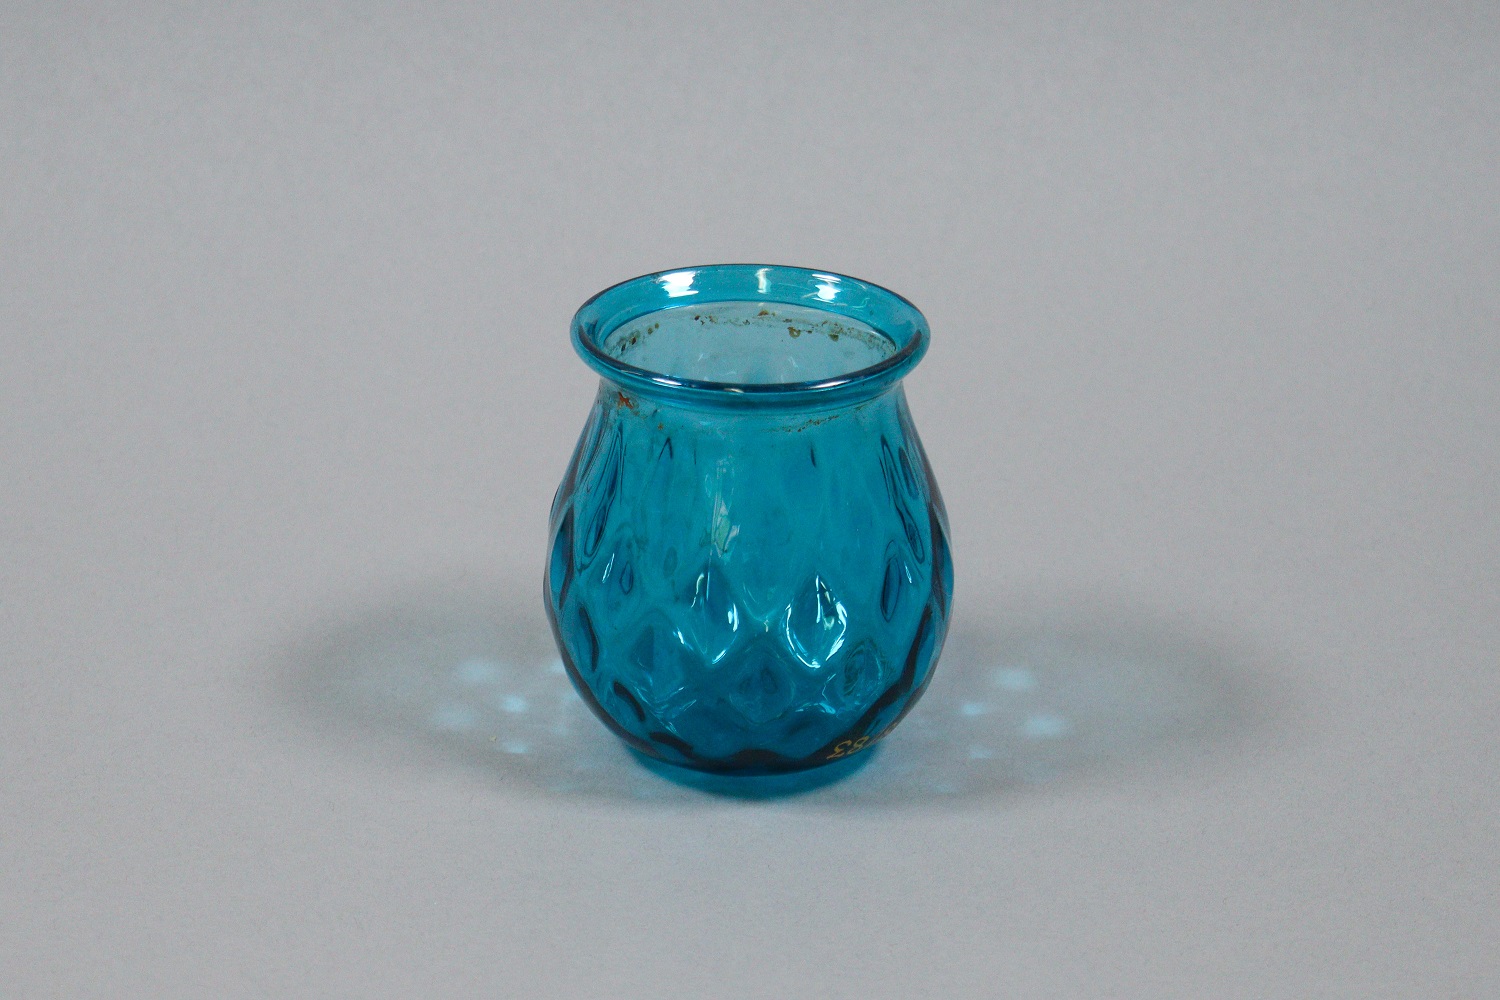 Light blue glass candle holder used during the visit of George IV to Edinburgh in 1822